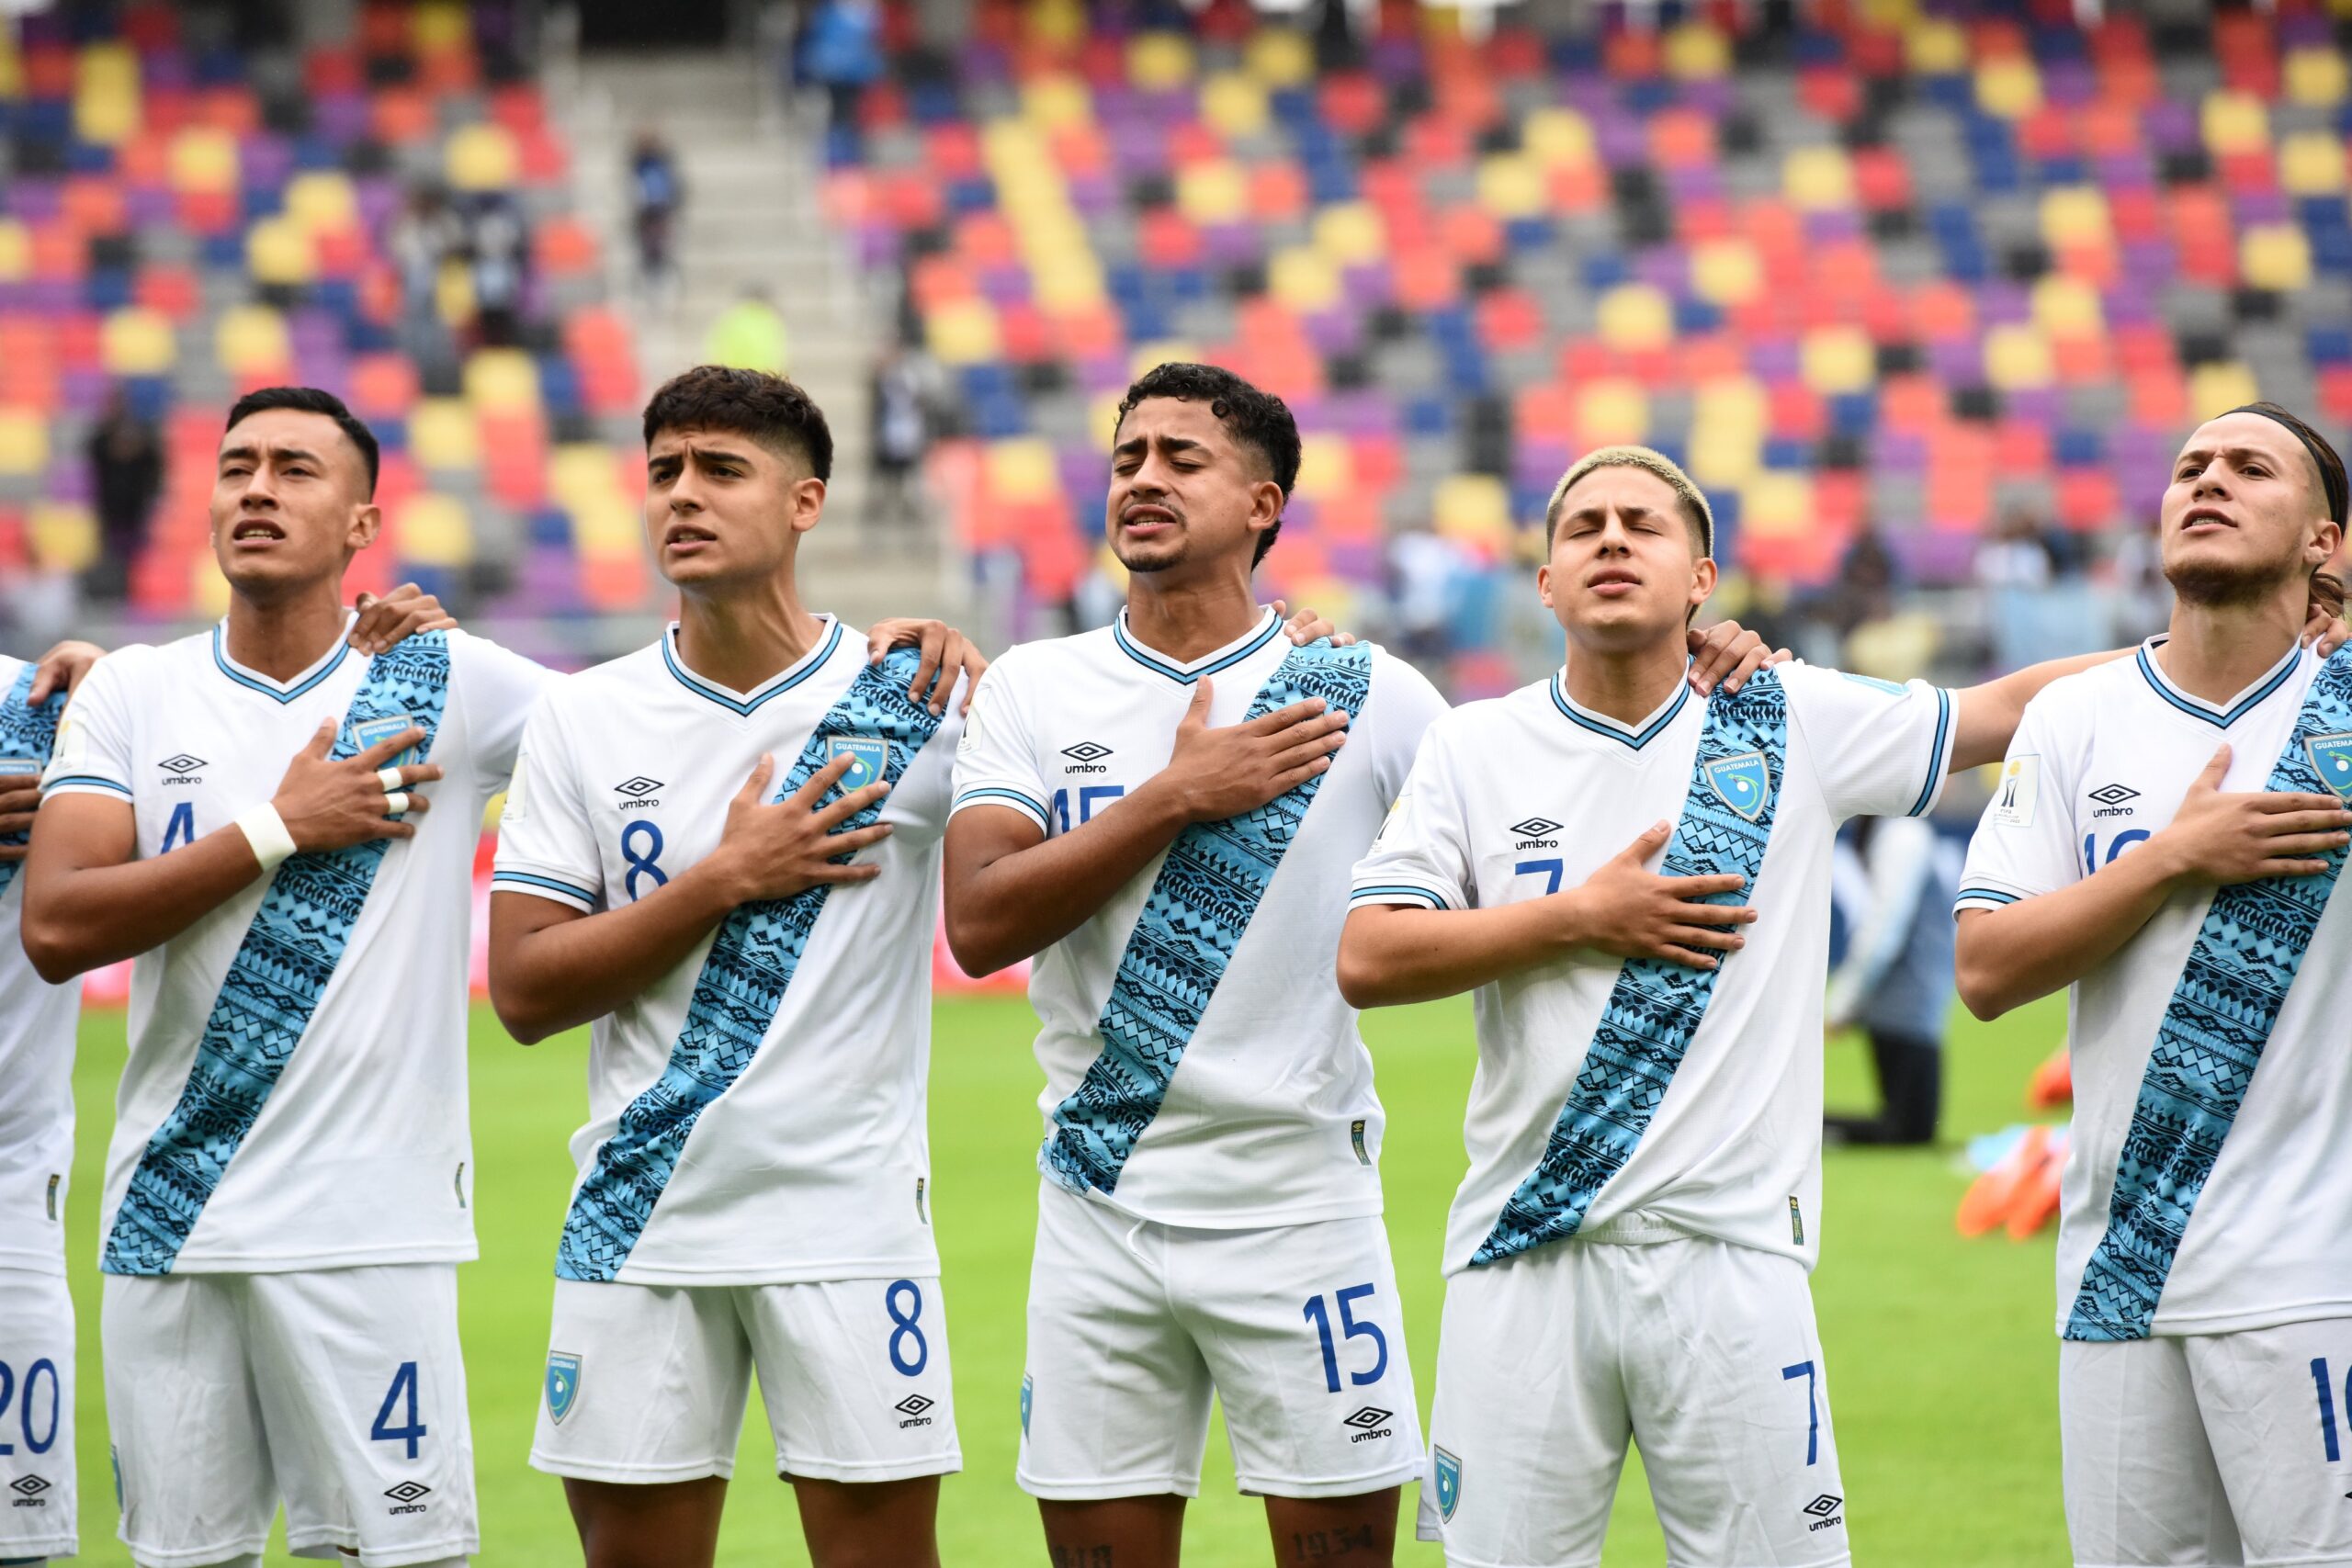 Guatemala fell in their World Cup opener against New Zealand